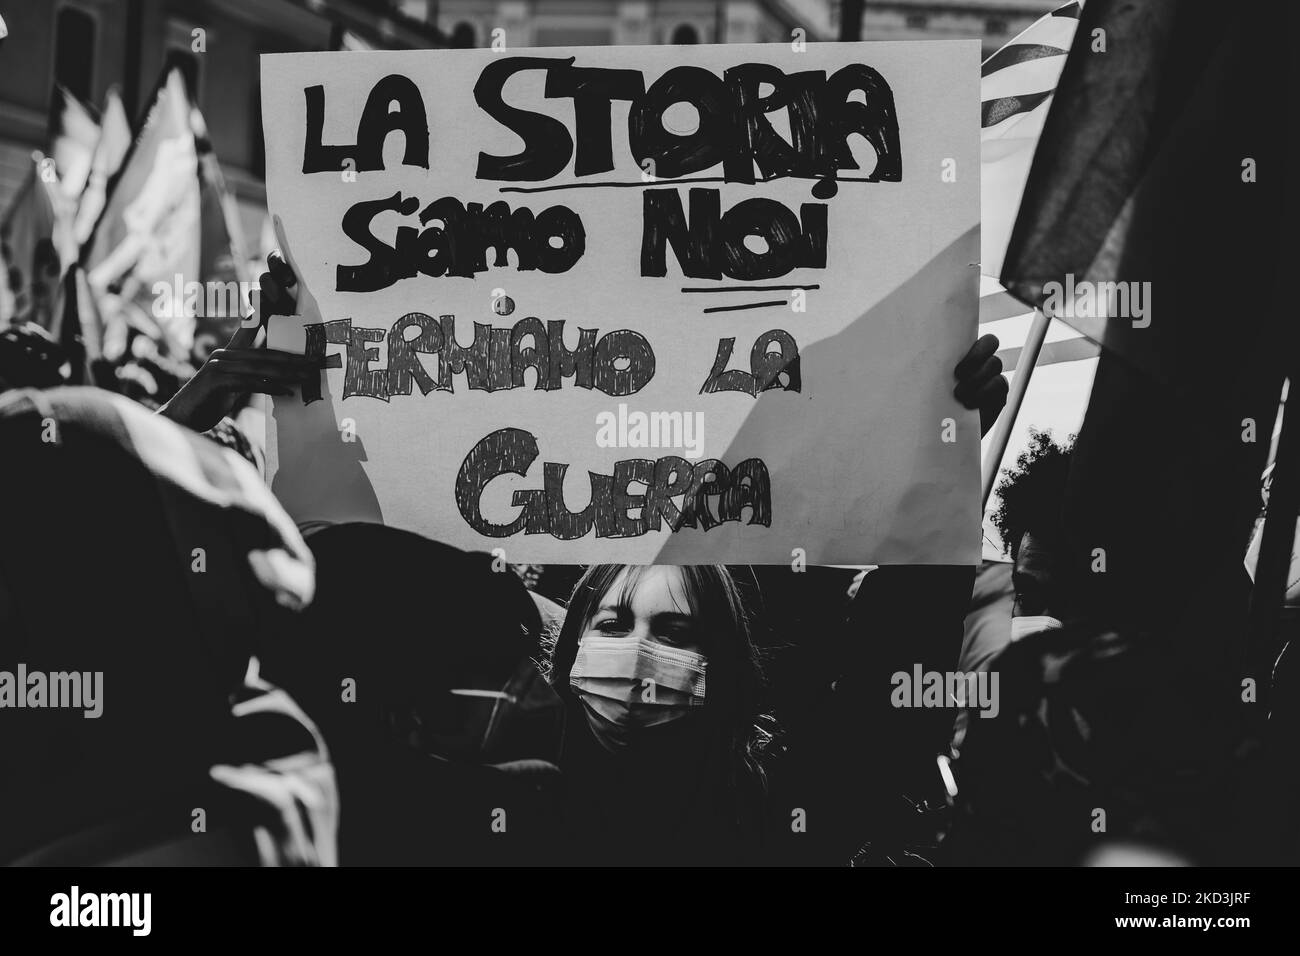 (EDITOR'S NOTE: Image was converted to black and white) Demonstration against war and for peace in support of the Ukrainian people, on February 26, 2022 in Rome, Italy. Thousands marched through the streets of Rome to express their dissent against the Russian invasion of Ukraine. They asked the Russians and Putin to stop the conflict immediately. (Photo by Matteo Trevisan/NurPhoto) Stock Photo